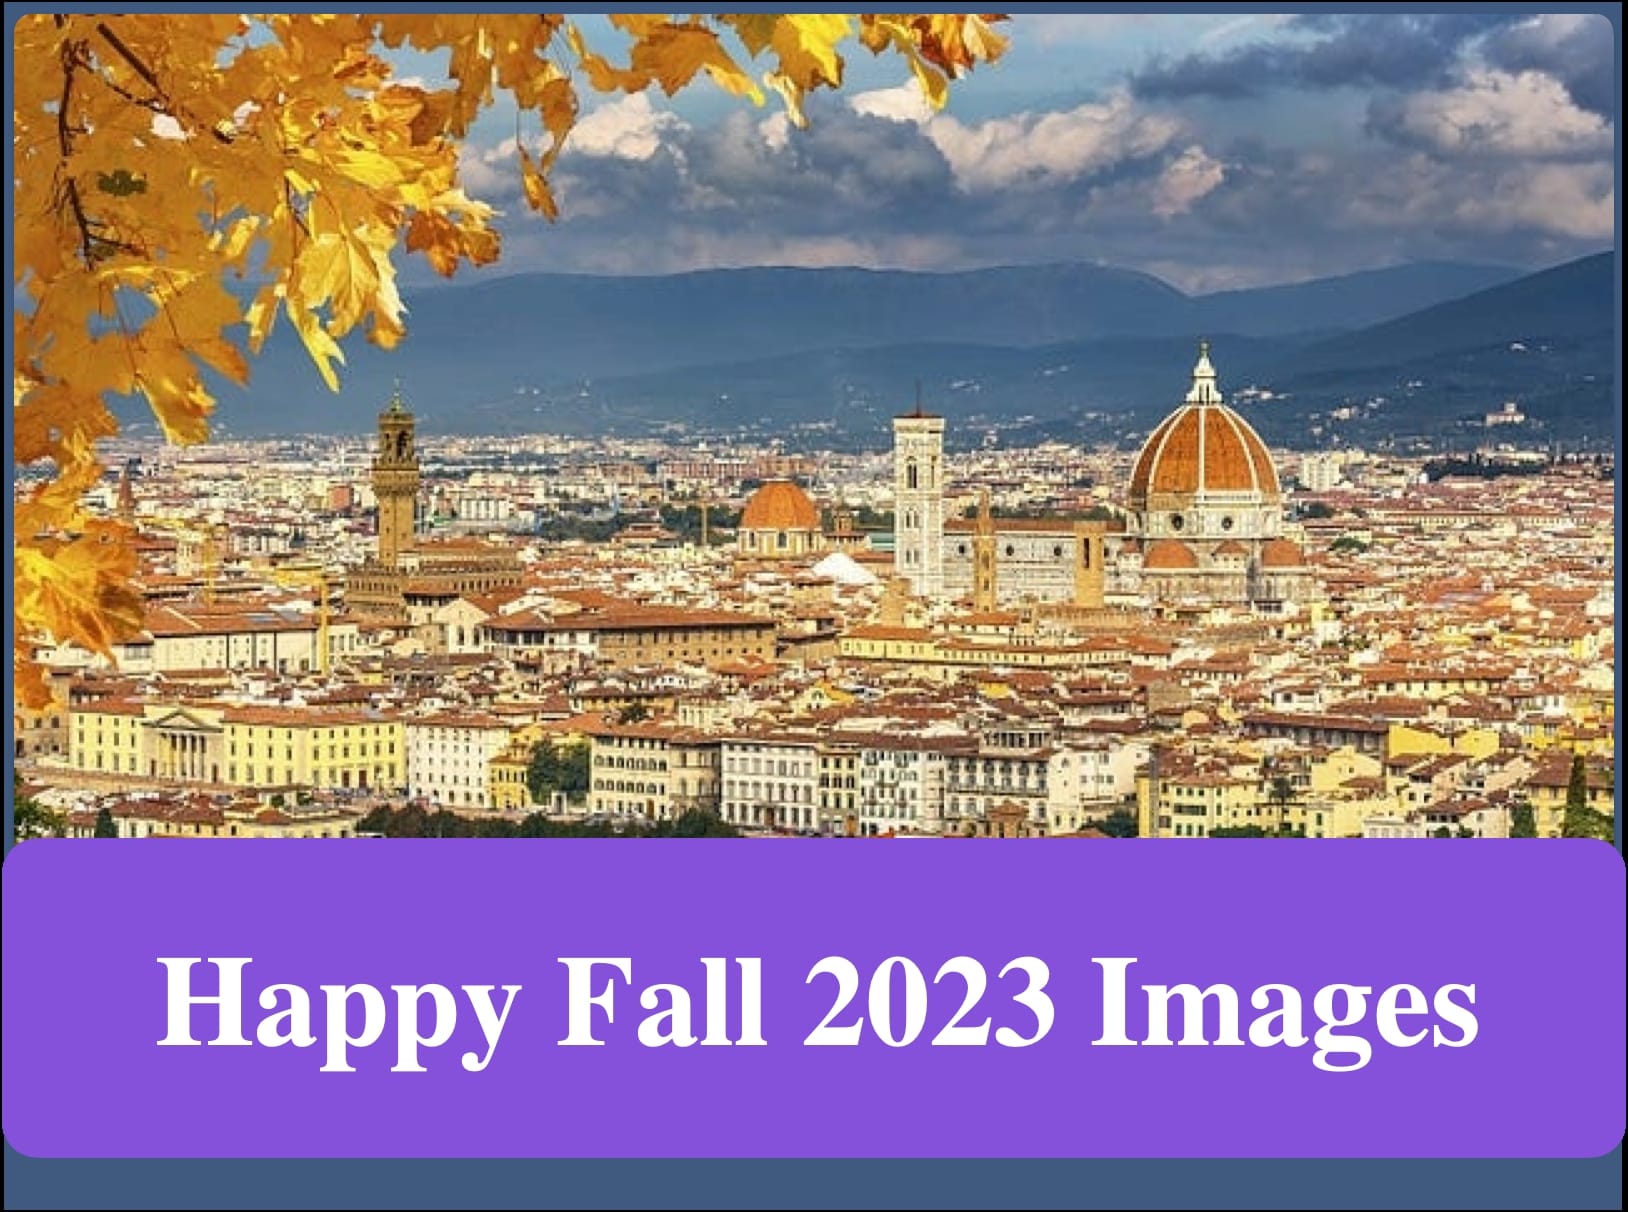 Happy Fall 2023 Images: Beautiful Photos to Explore